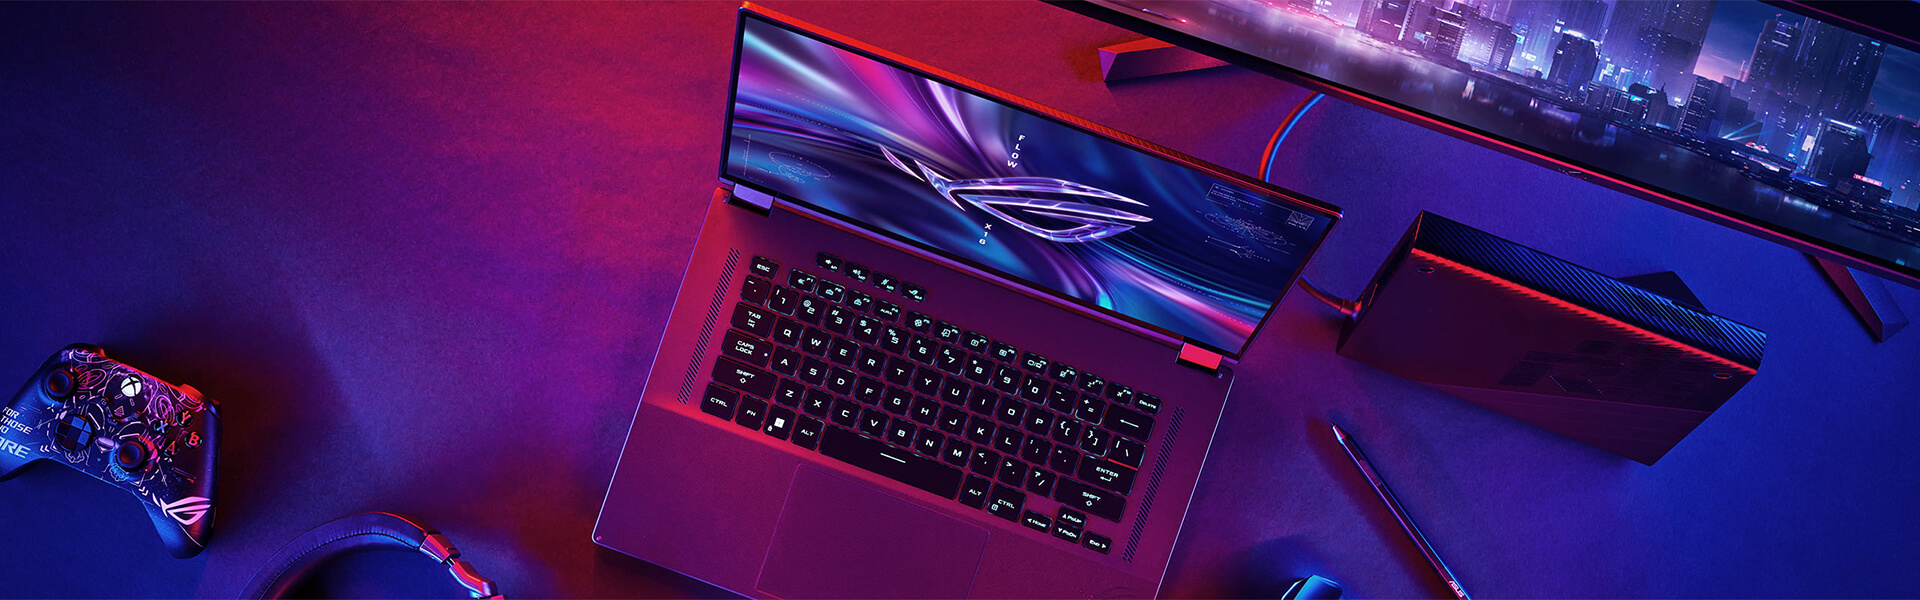 The ROG Flow X16 laptop sitting open on a desk next to a game controller, monitor, and XG Mobile external GPU